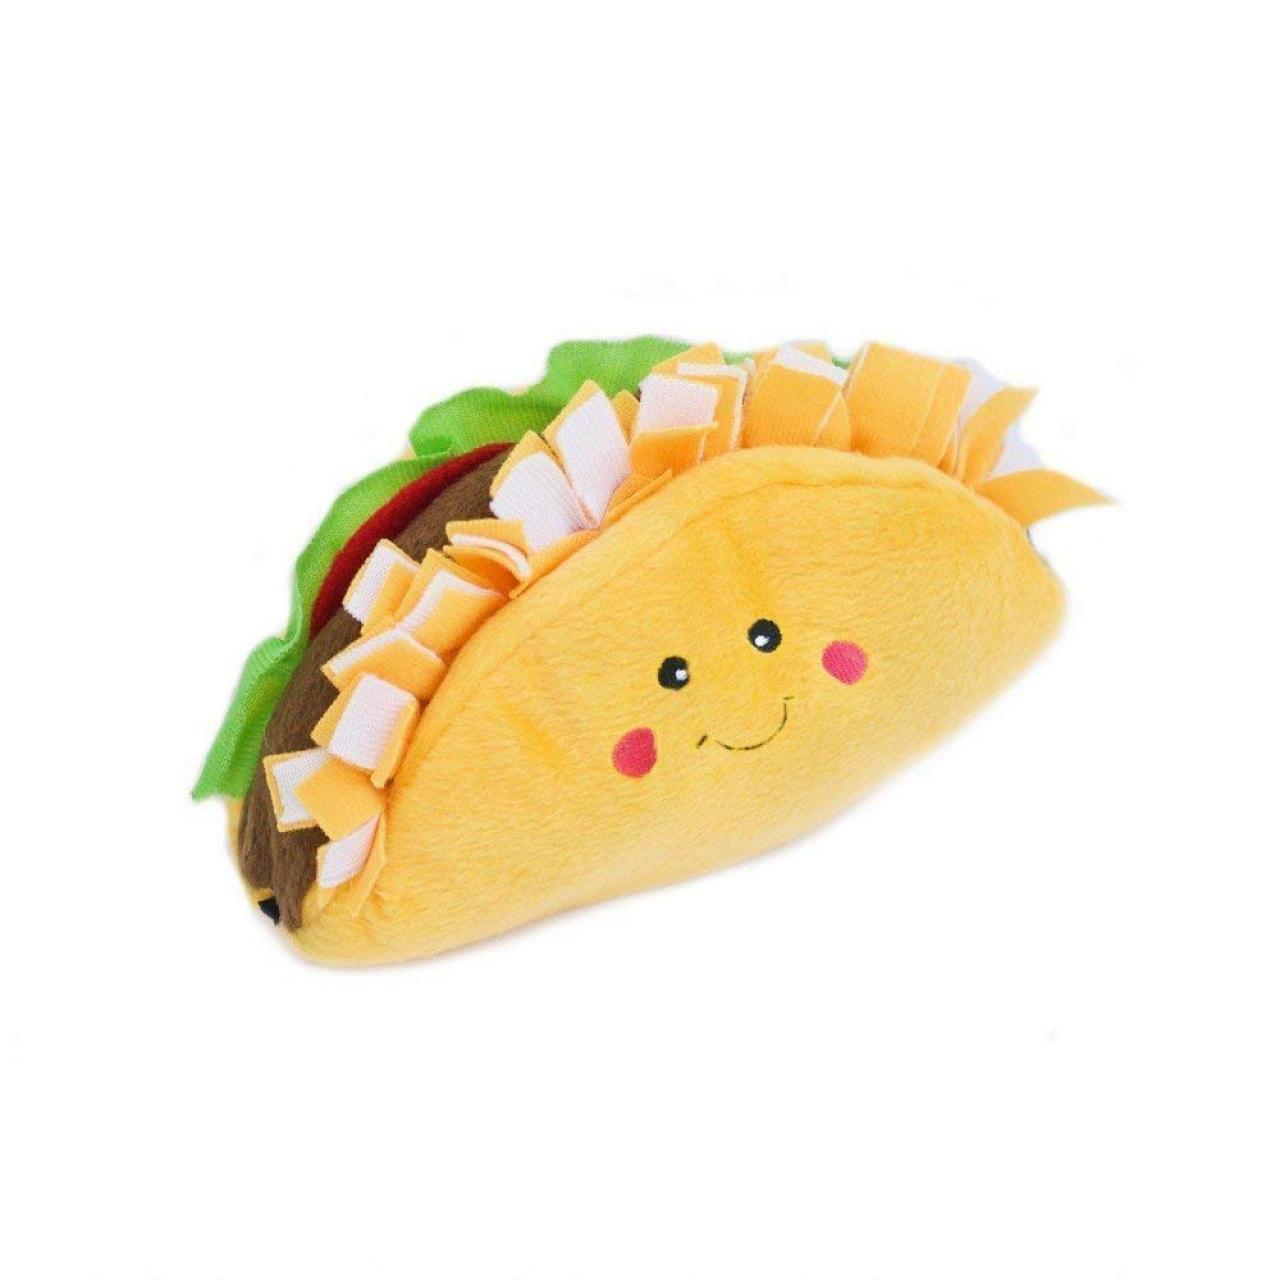 https://food.fnr.sndimg.com/content/dam/images/food/products/2019/1/9/rx_zippypaws-plush-squeaker-taco-dog-toy.jpeg.rend.hgtvcom.1280.1280.suffix/1547050541074.jpeg